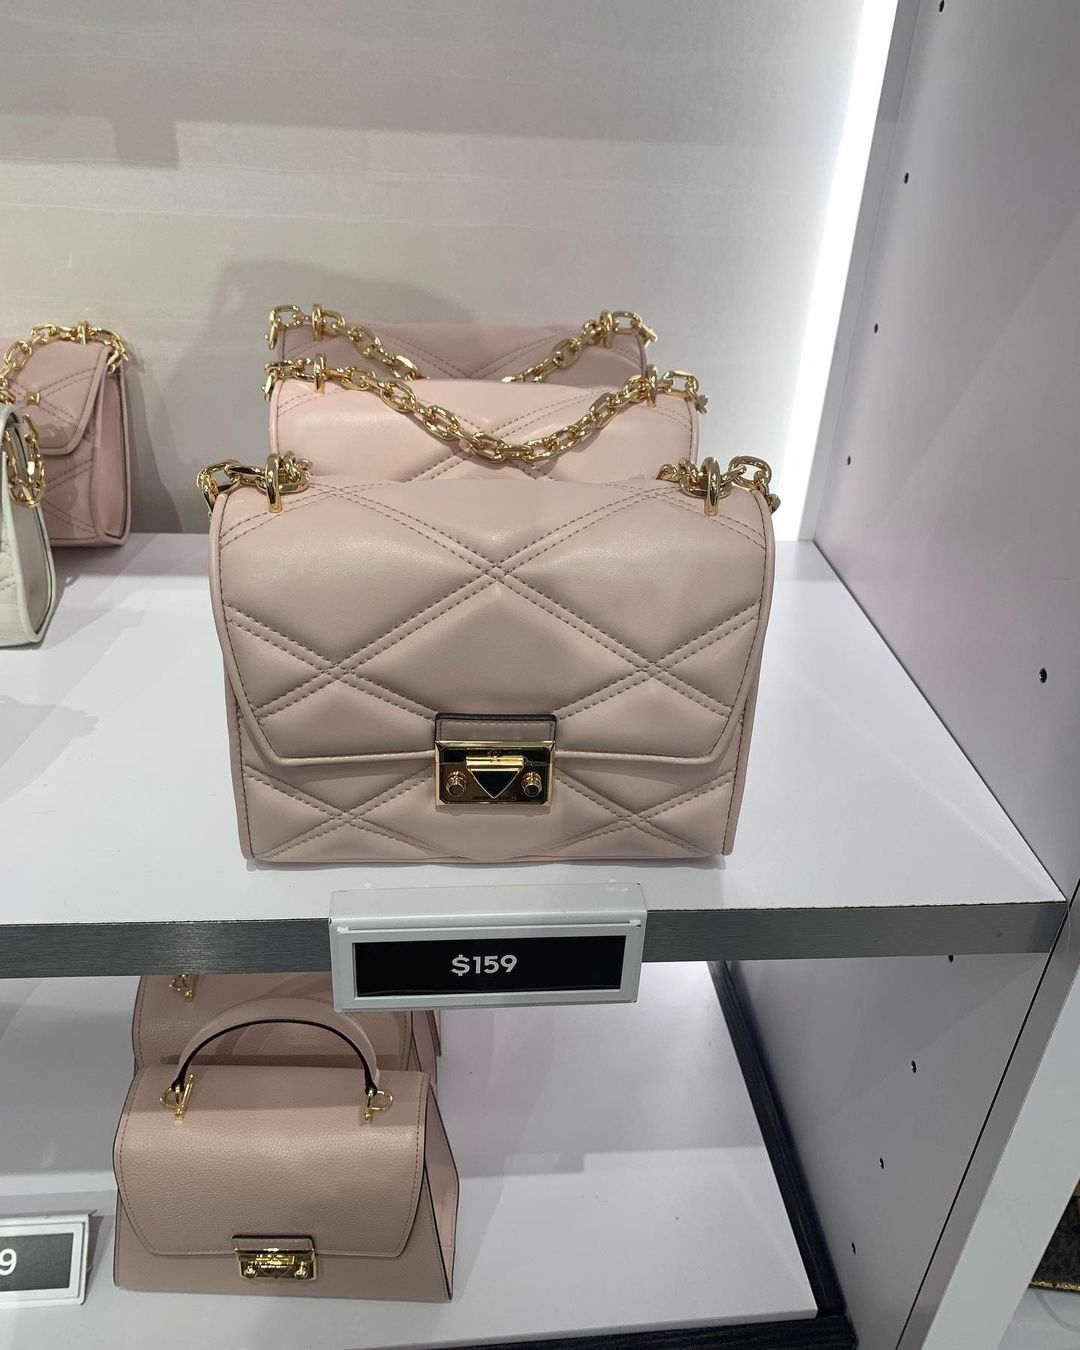 Michael Kors - Bags and Accessories Store at Orlando Premium Outlets